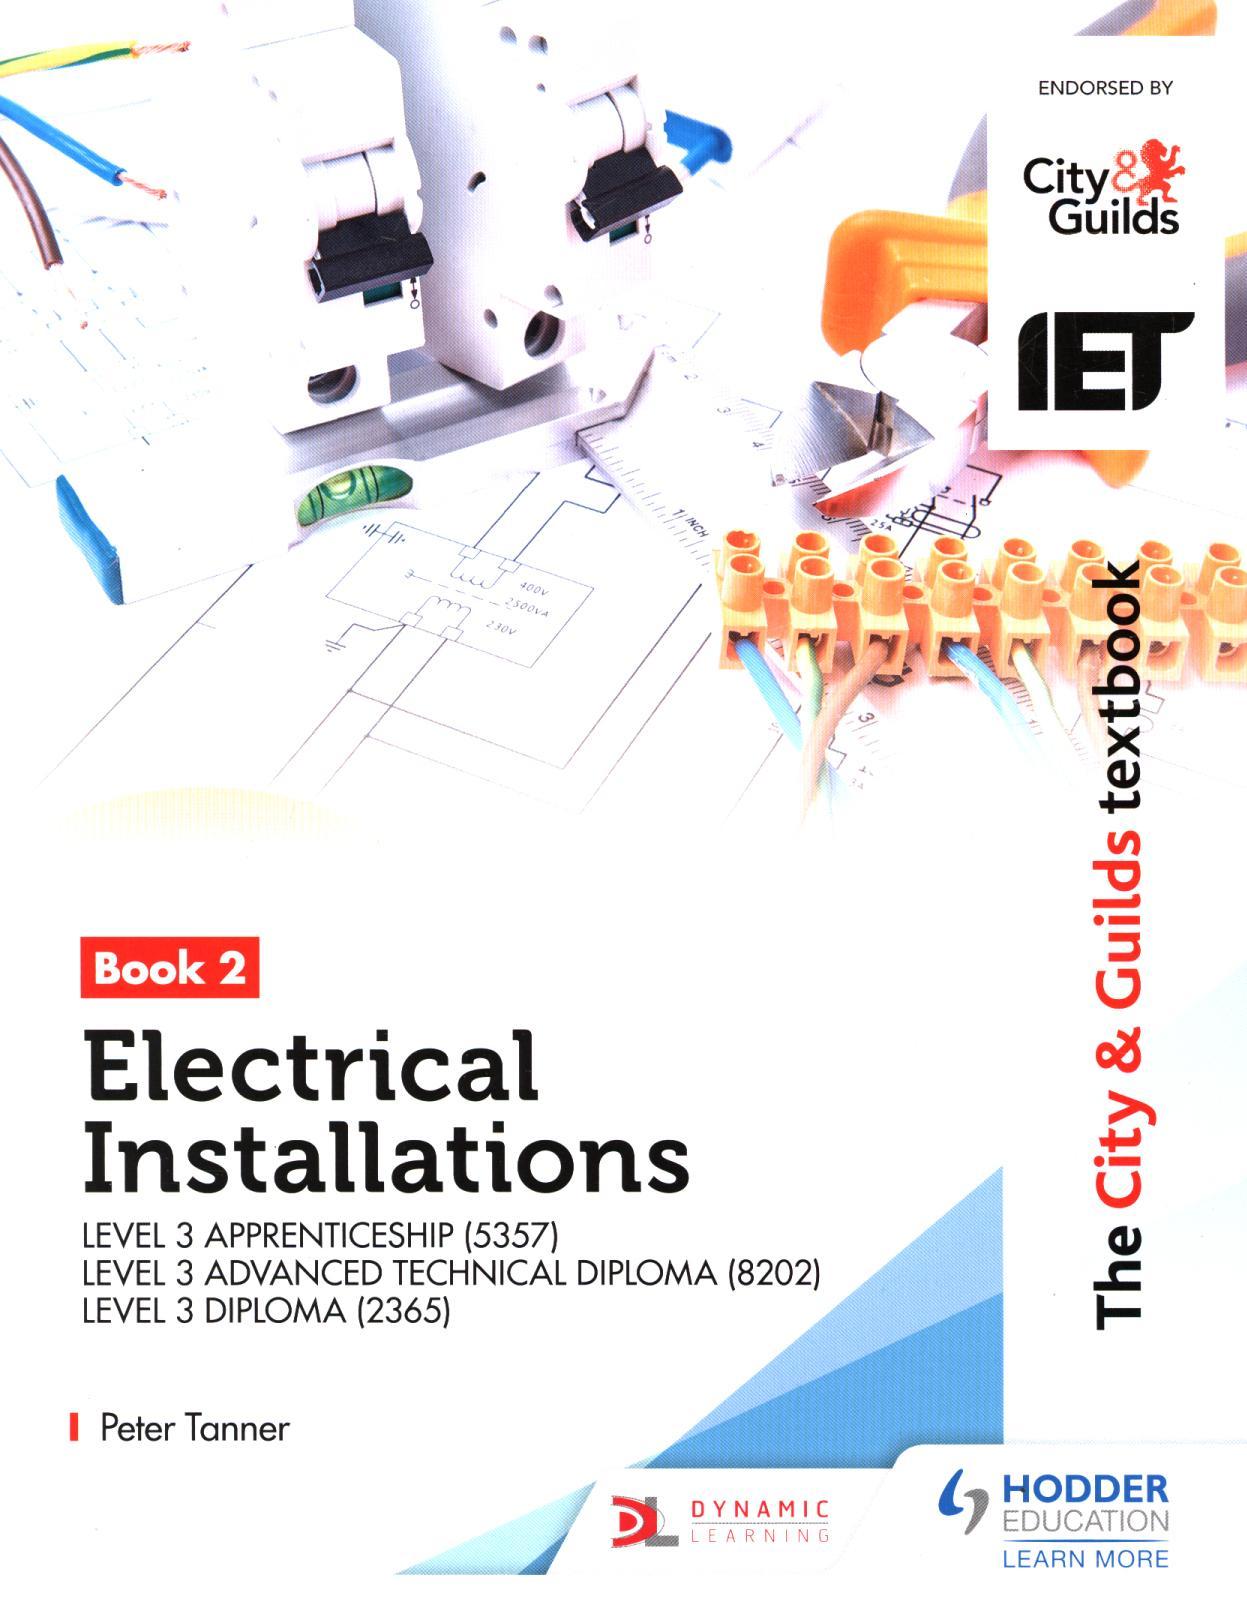 The City & Guilds Textbook:Book 2 Electrical Installations f